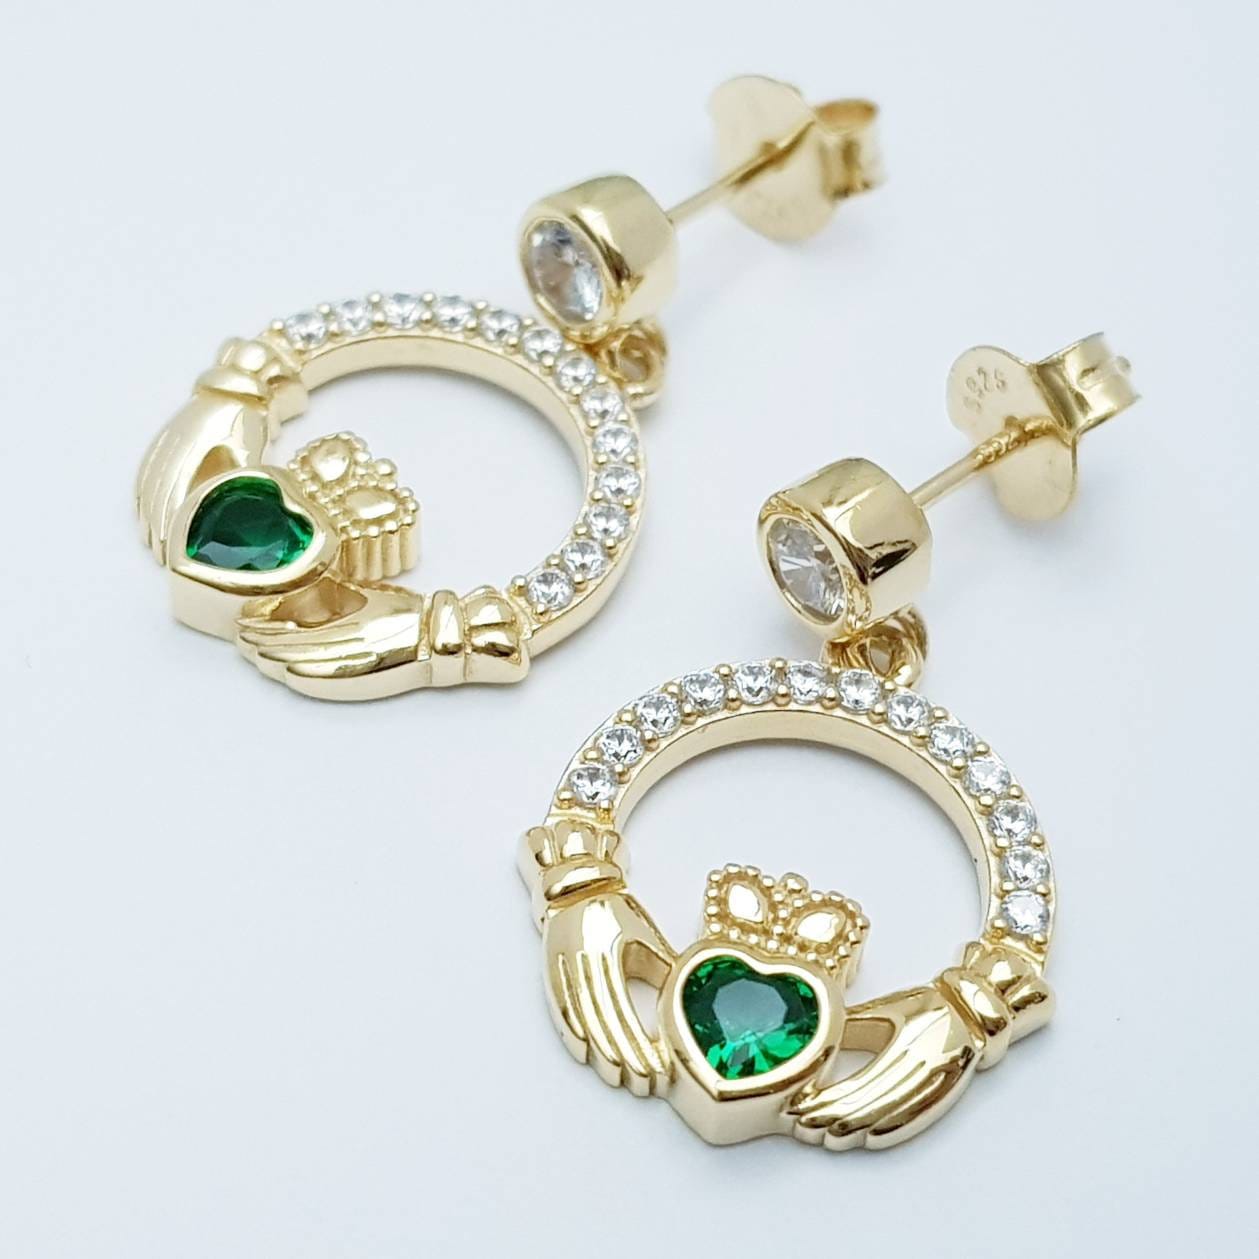 Emerald green claddagh Earrings, Silver and yellow gold Claddagh Earrings, Claddagh drop Earrings